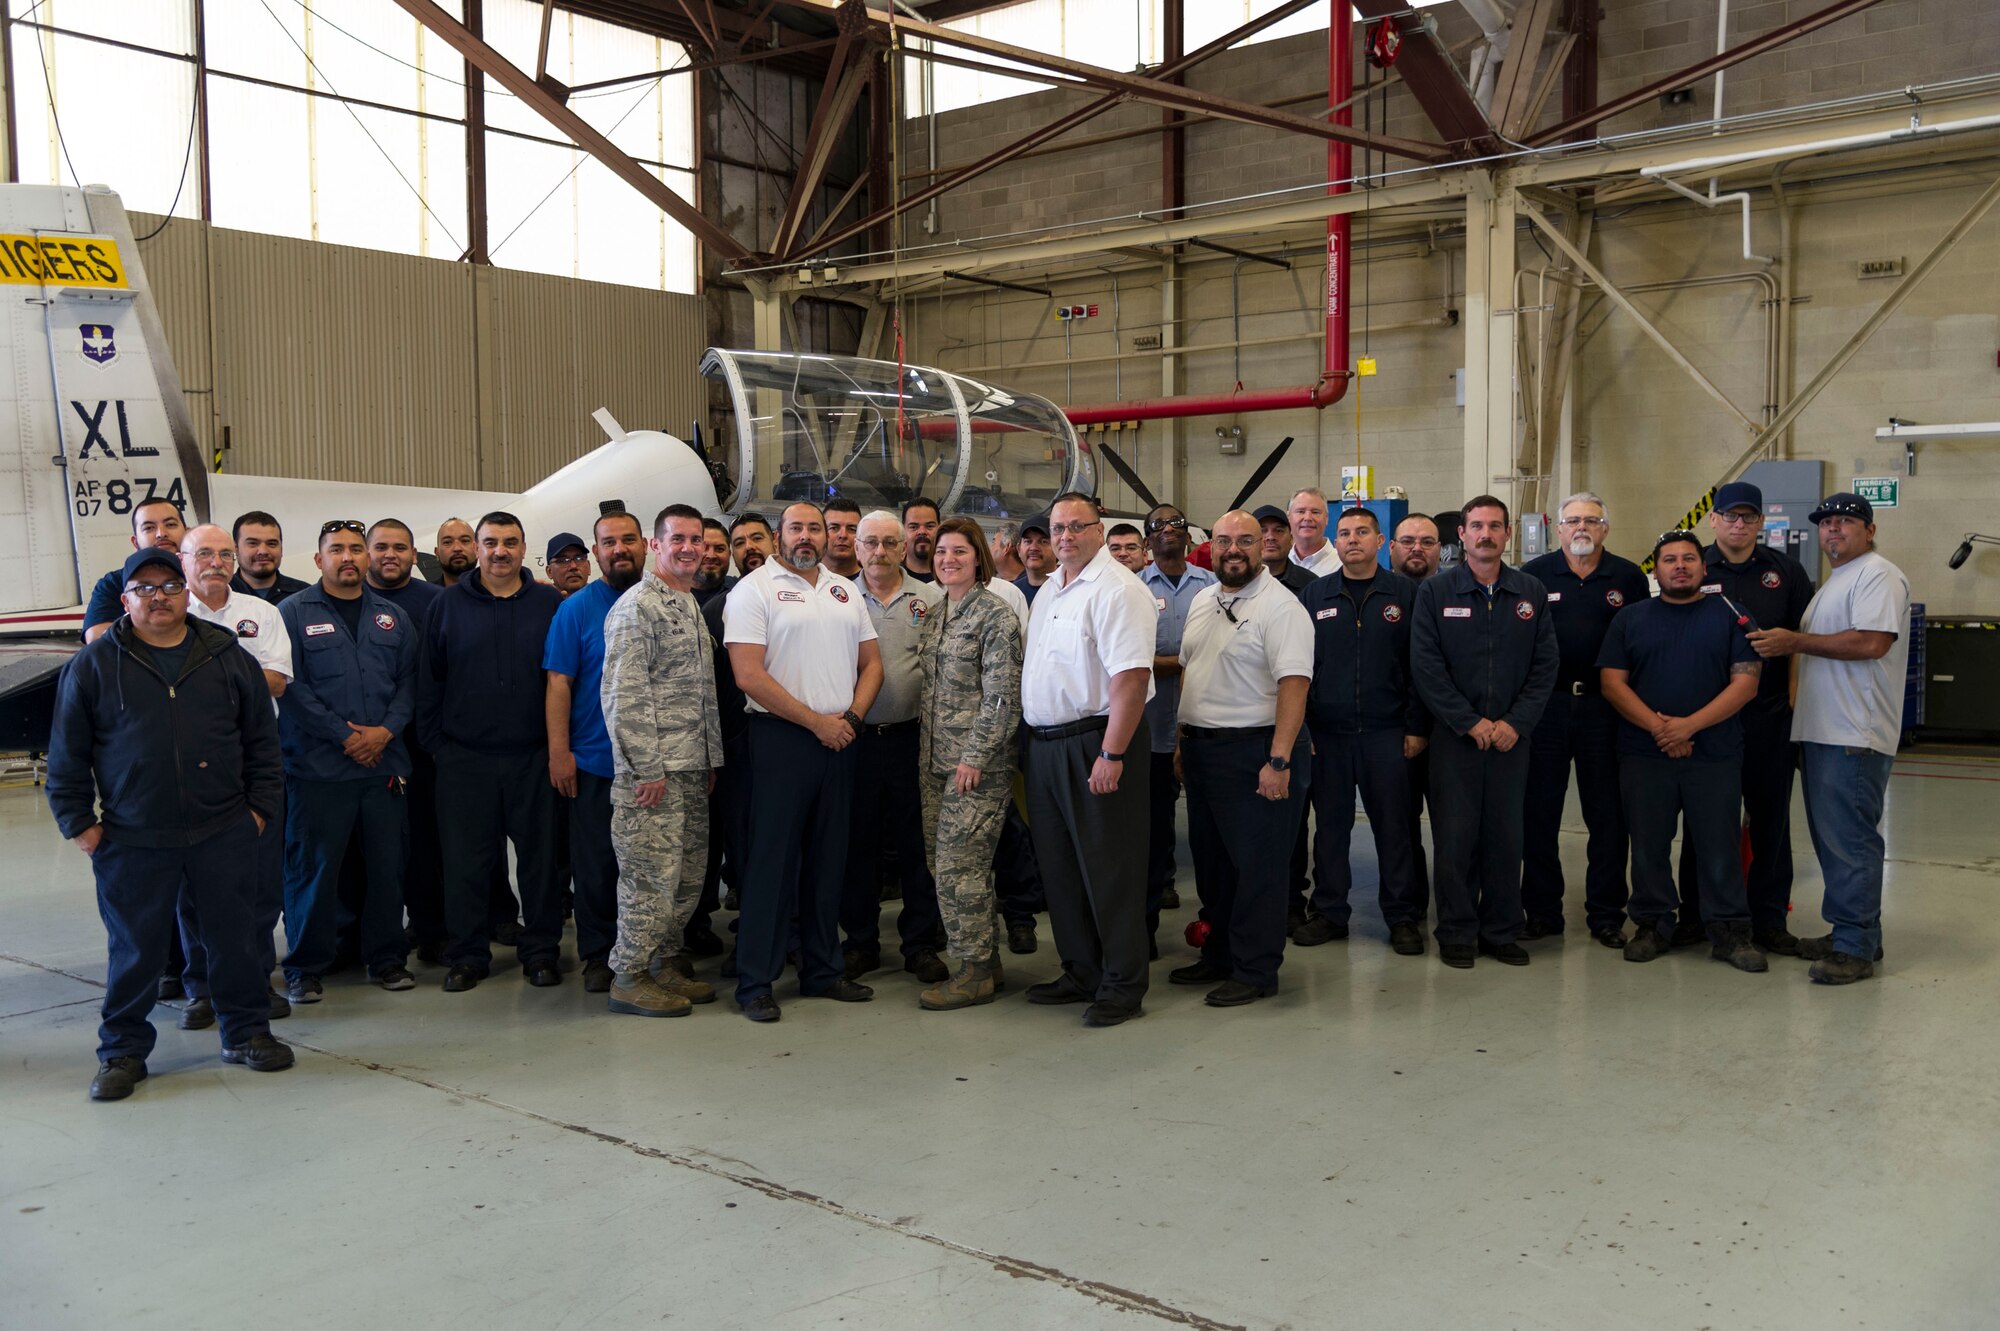 Benjamin Gonzalez IV, 47th Maintenance Directorate swing shift productions supervisor, was chosen by wing leadership to be the “XLer” of the week, for the week of Feb. 26, 2018, at Laughlin Air Force Base, Texas. The “XLer” award, presented by Col. Charlie Velino, 47th Flying Training Wing commander, is given to those who consistently make outstanding contributions to their unit and the Laughlin mission. (U.S. Air Force photo/Airman 1st Class Daniel Hambor)